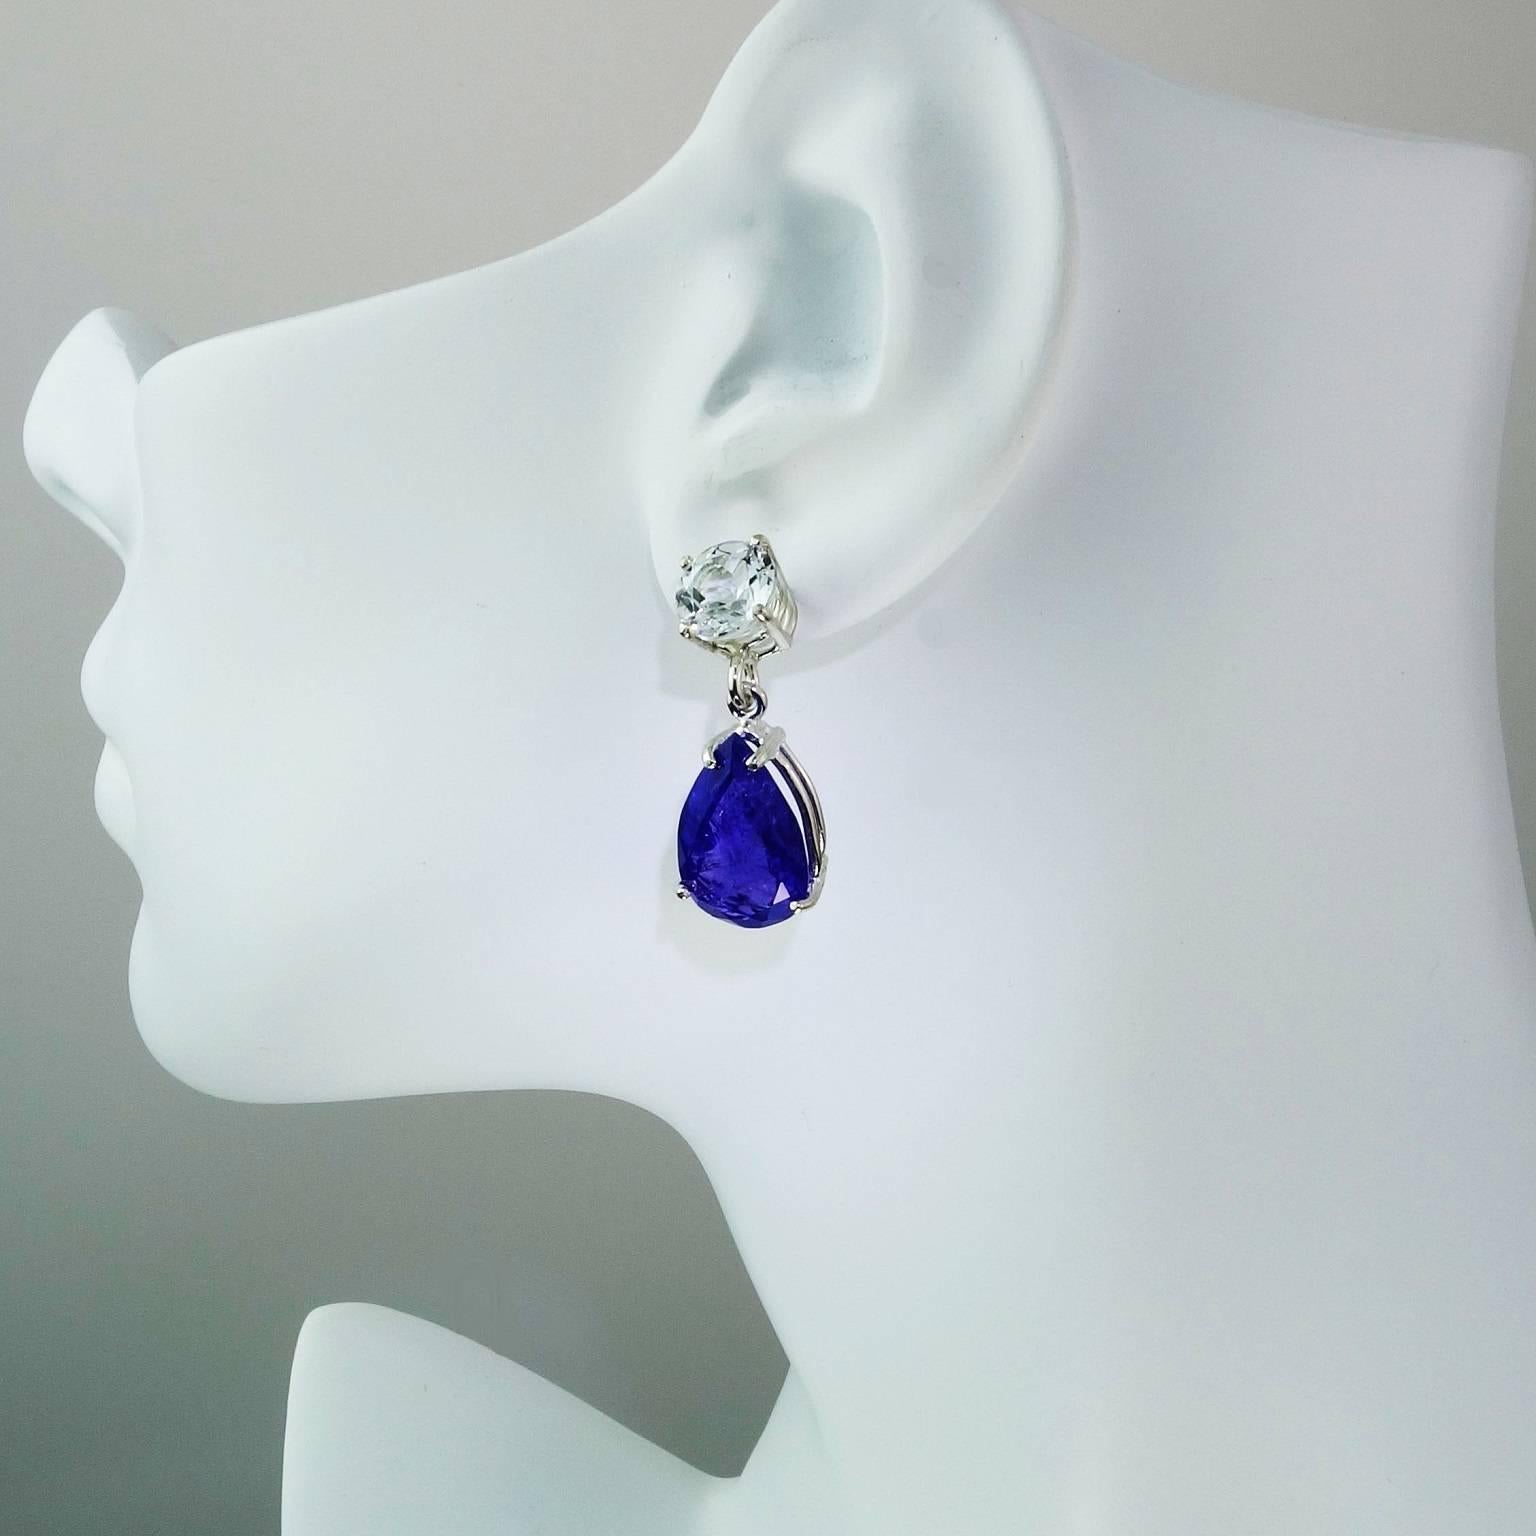 Lively Pear Shaped Tanzanites (13.73ct) and Sparkling Round Silver Topaz (8MM) together in Statement Dangle Earrings. The gemstones are set in Sterling Silver.  The Tanzanites have the natural inclusions typical of tanzanites which help reflect the